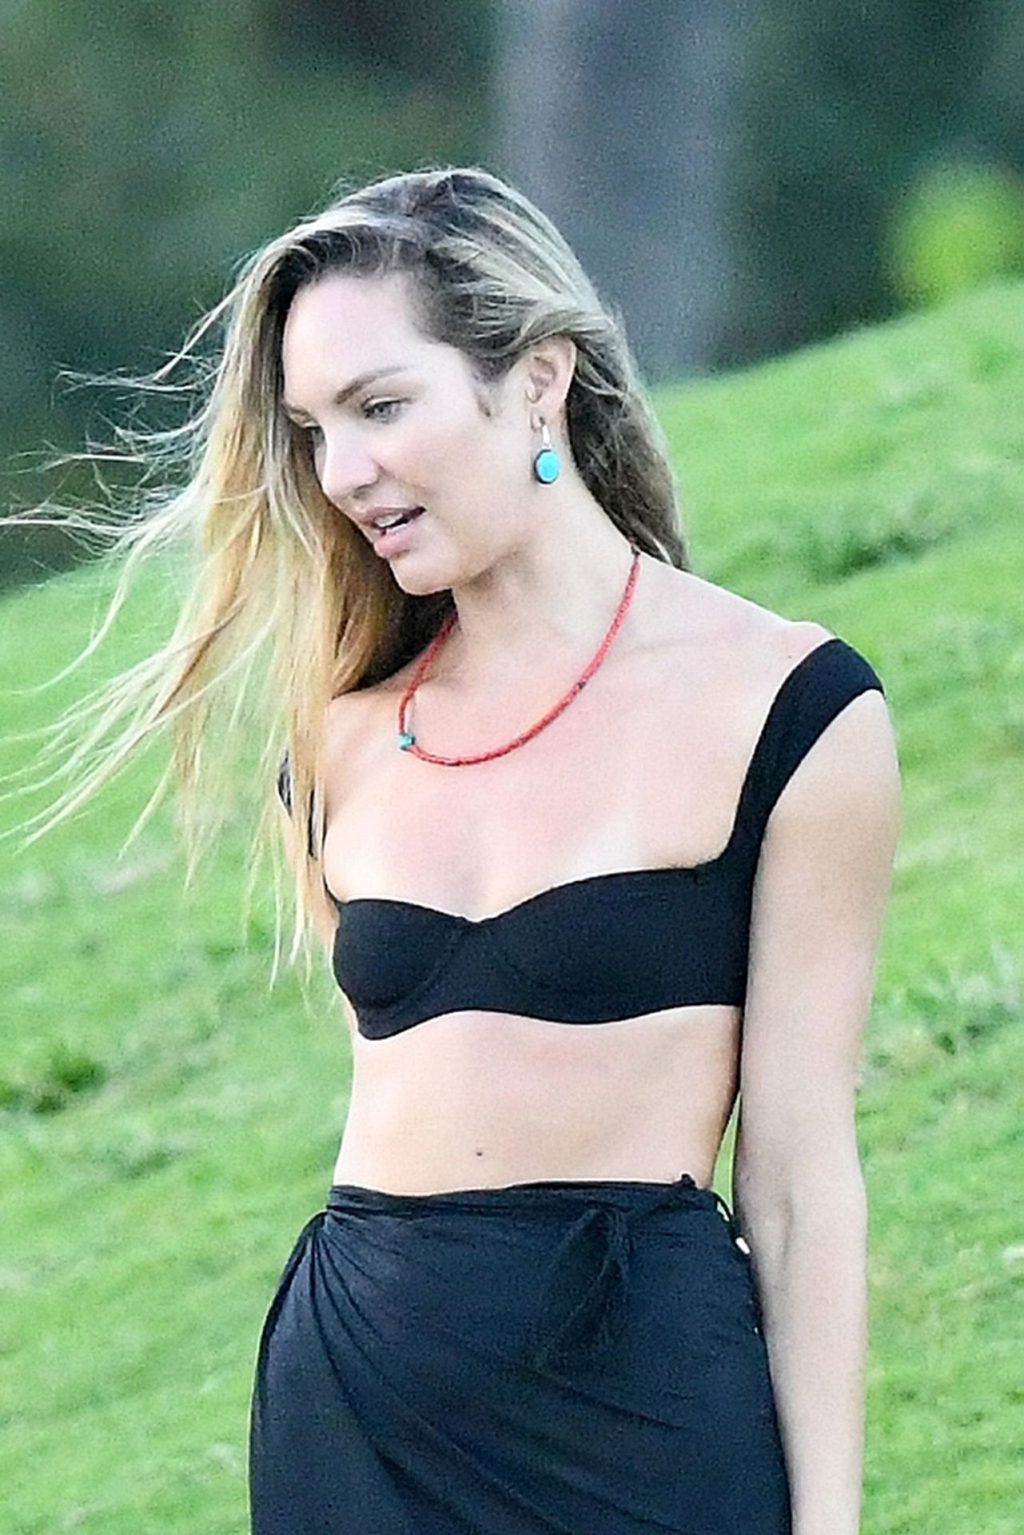 Candice Swanepoel Flashes Her Panties and Flaunts Slender Legs at the Park in Miami (38 Photos)